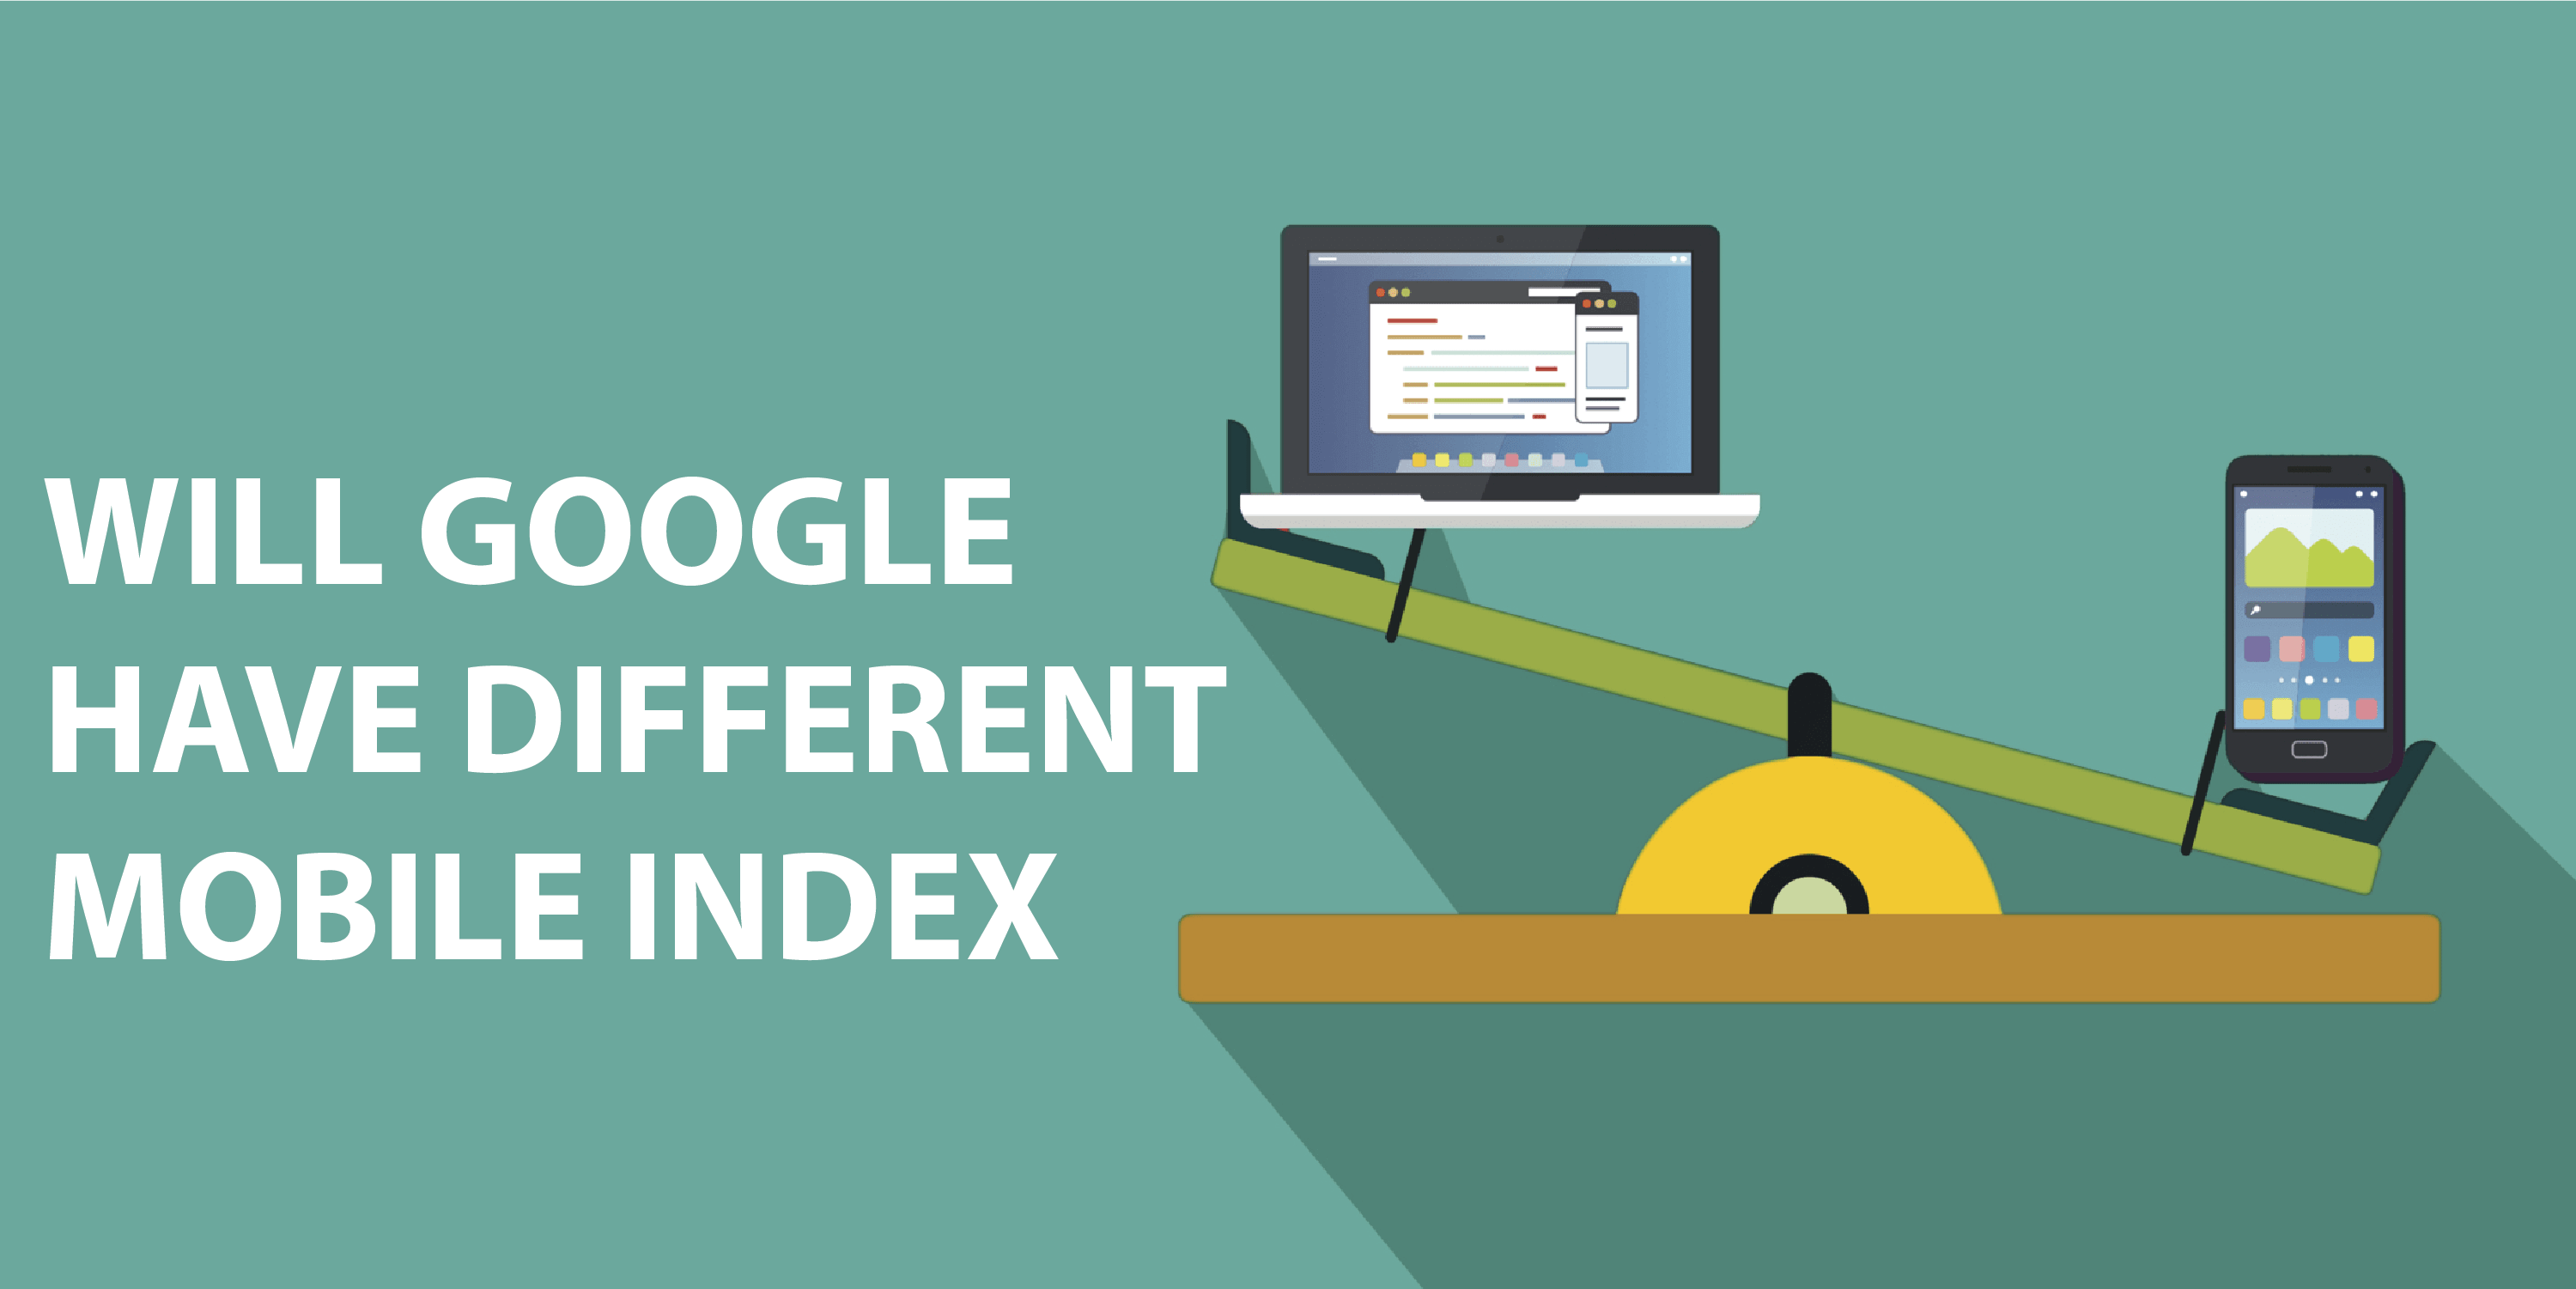 WILL GOOGLE HAVE DIFFERENT MOBILE INDEX AND DESKTOP INDEX